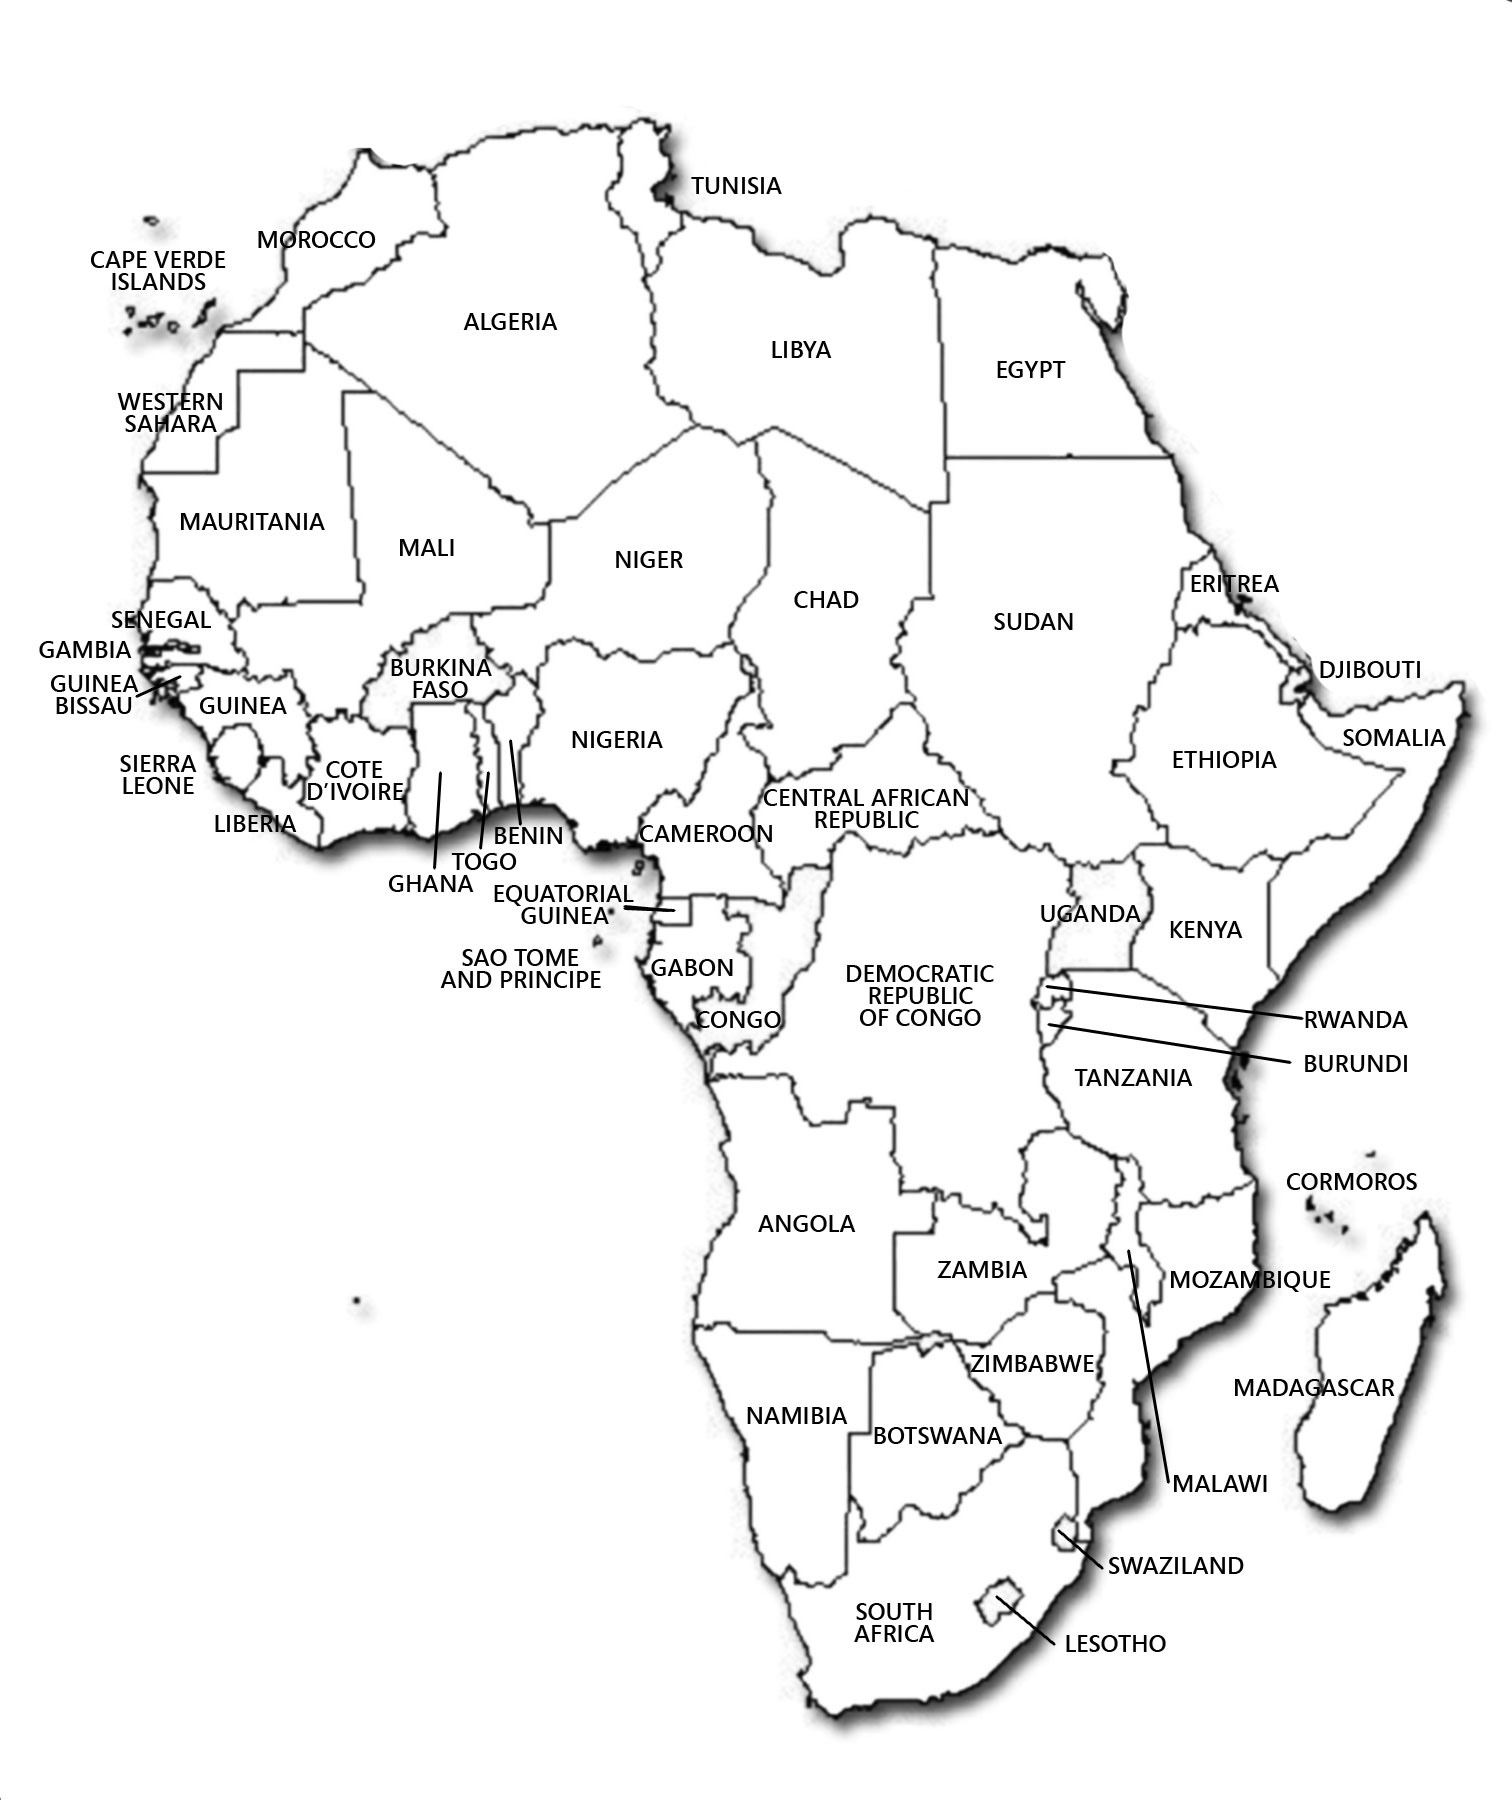 political map of africa black and white Maps Of Africa And African Countries Political Maps political map of africa black and white